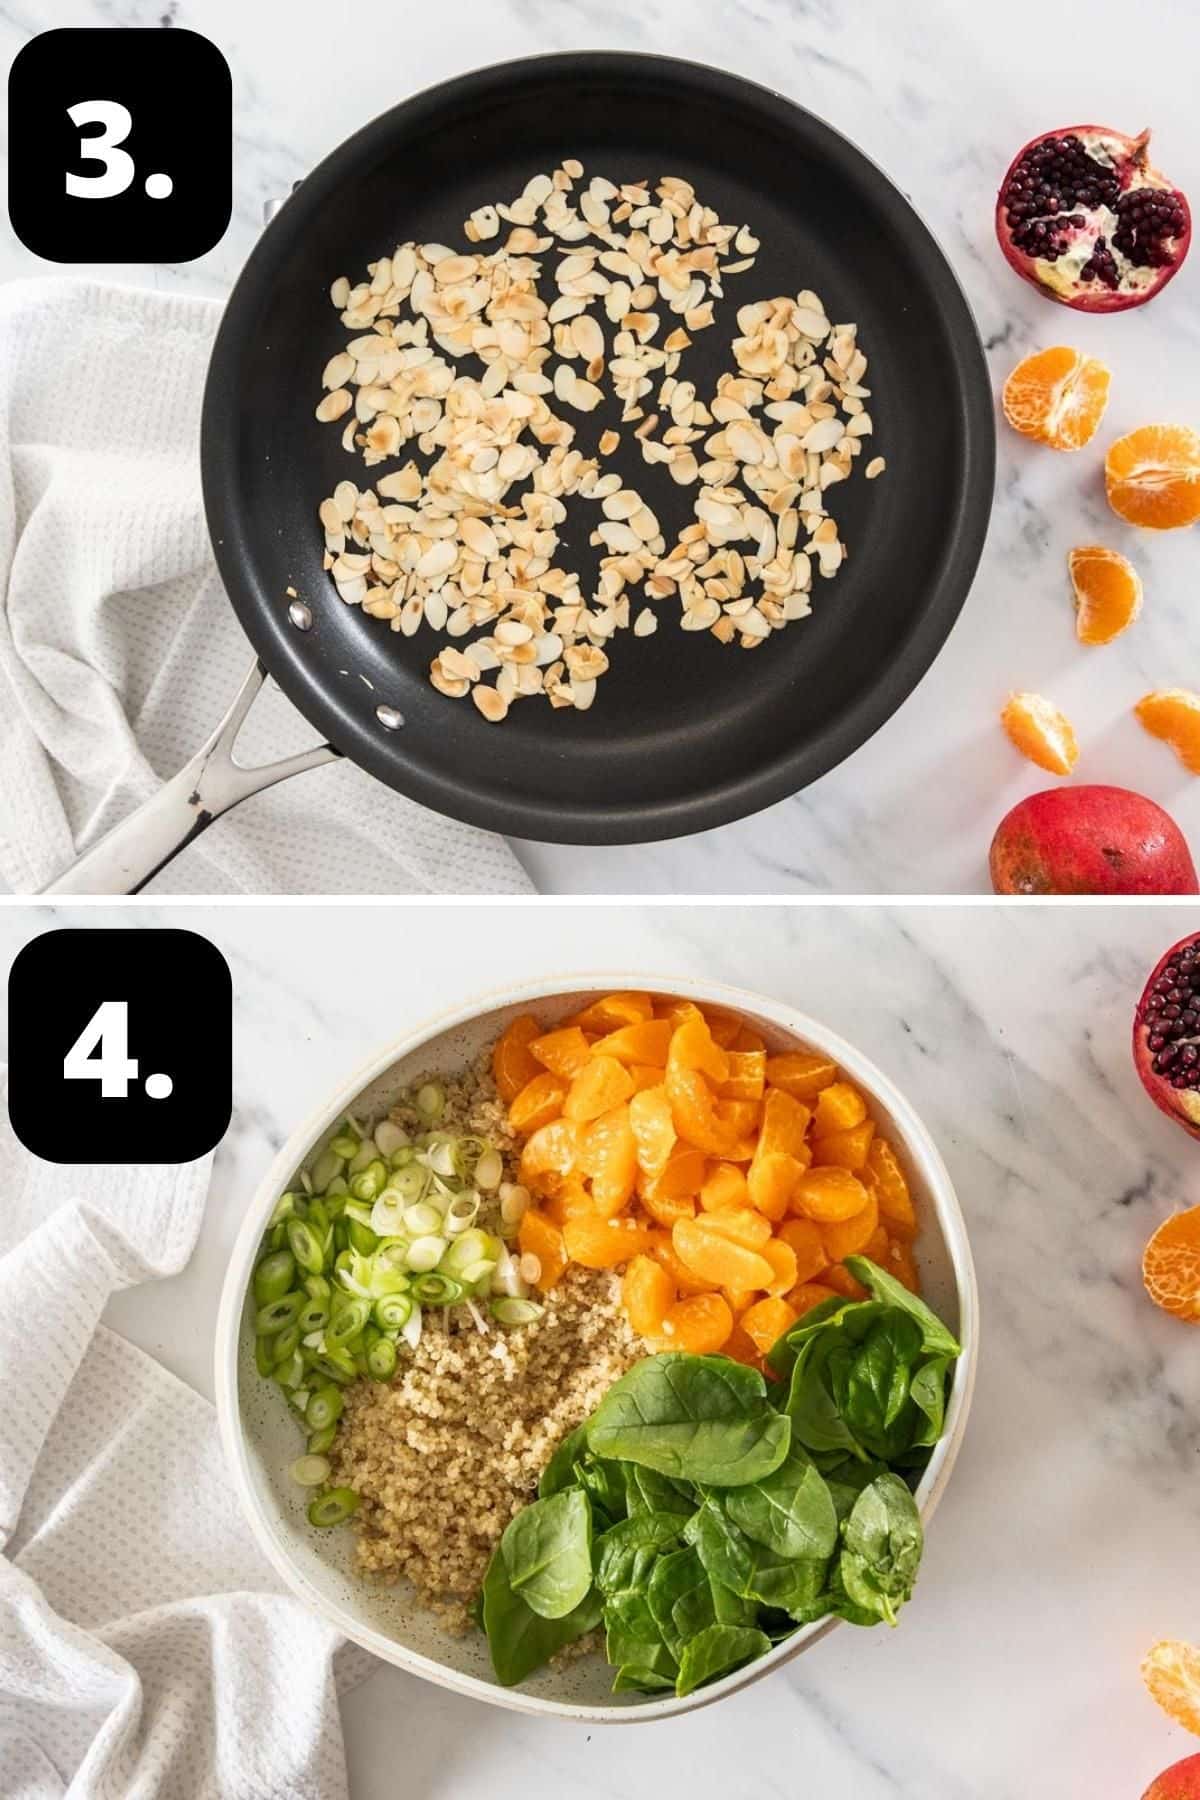 Steps 3-4 of preparing this recipe - toasting the almonds in a frying pan and the ingredients for the salad in a large bowl.